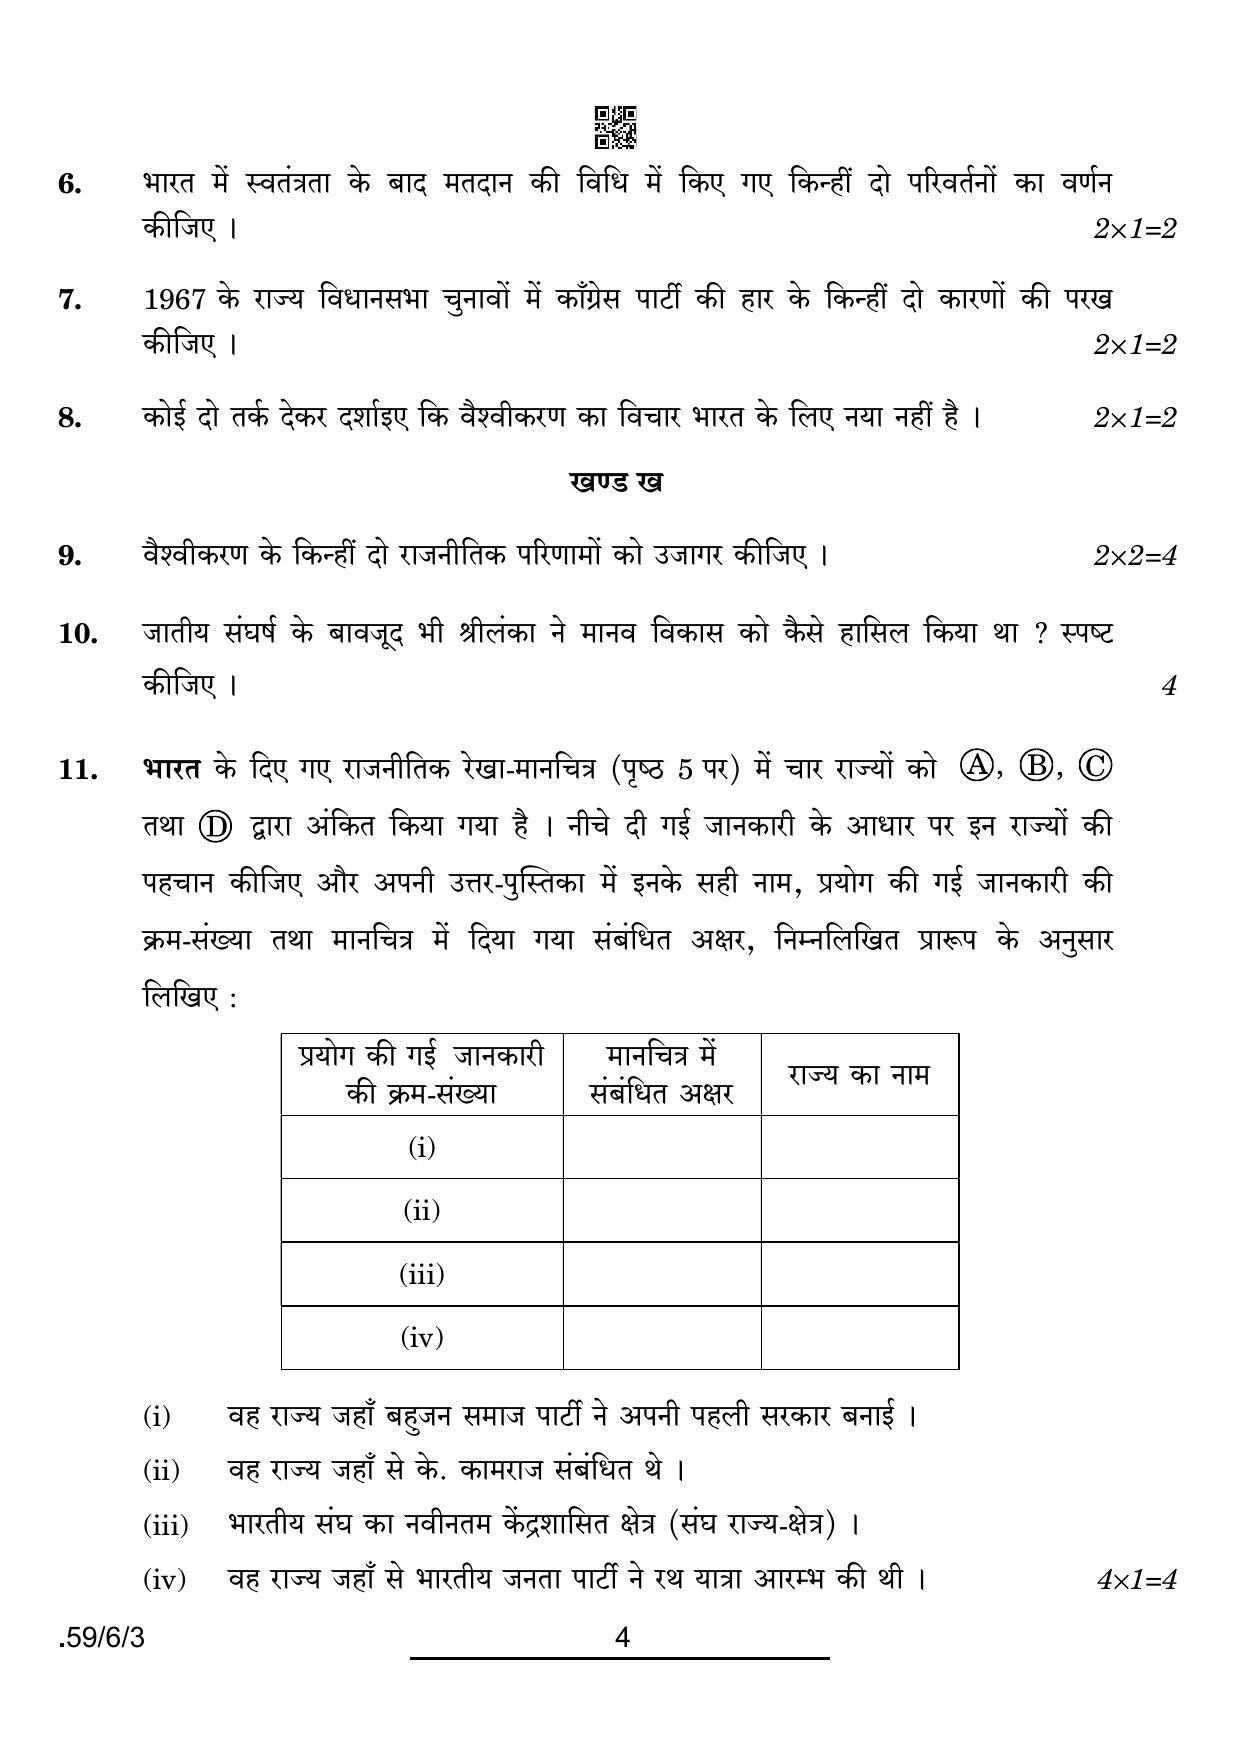 CBSE Class 12 59-6-3 POL SCIENCE 2022 Compartment Question Paper - Page 4